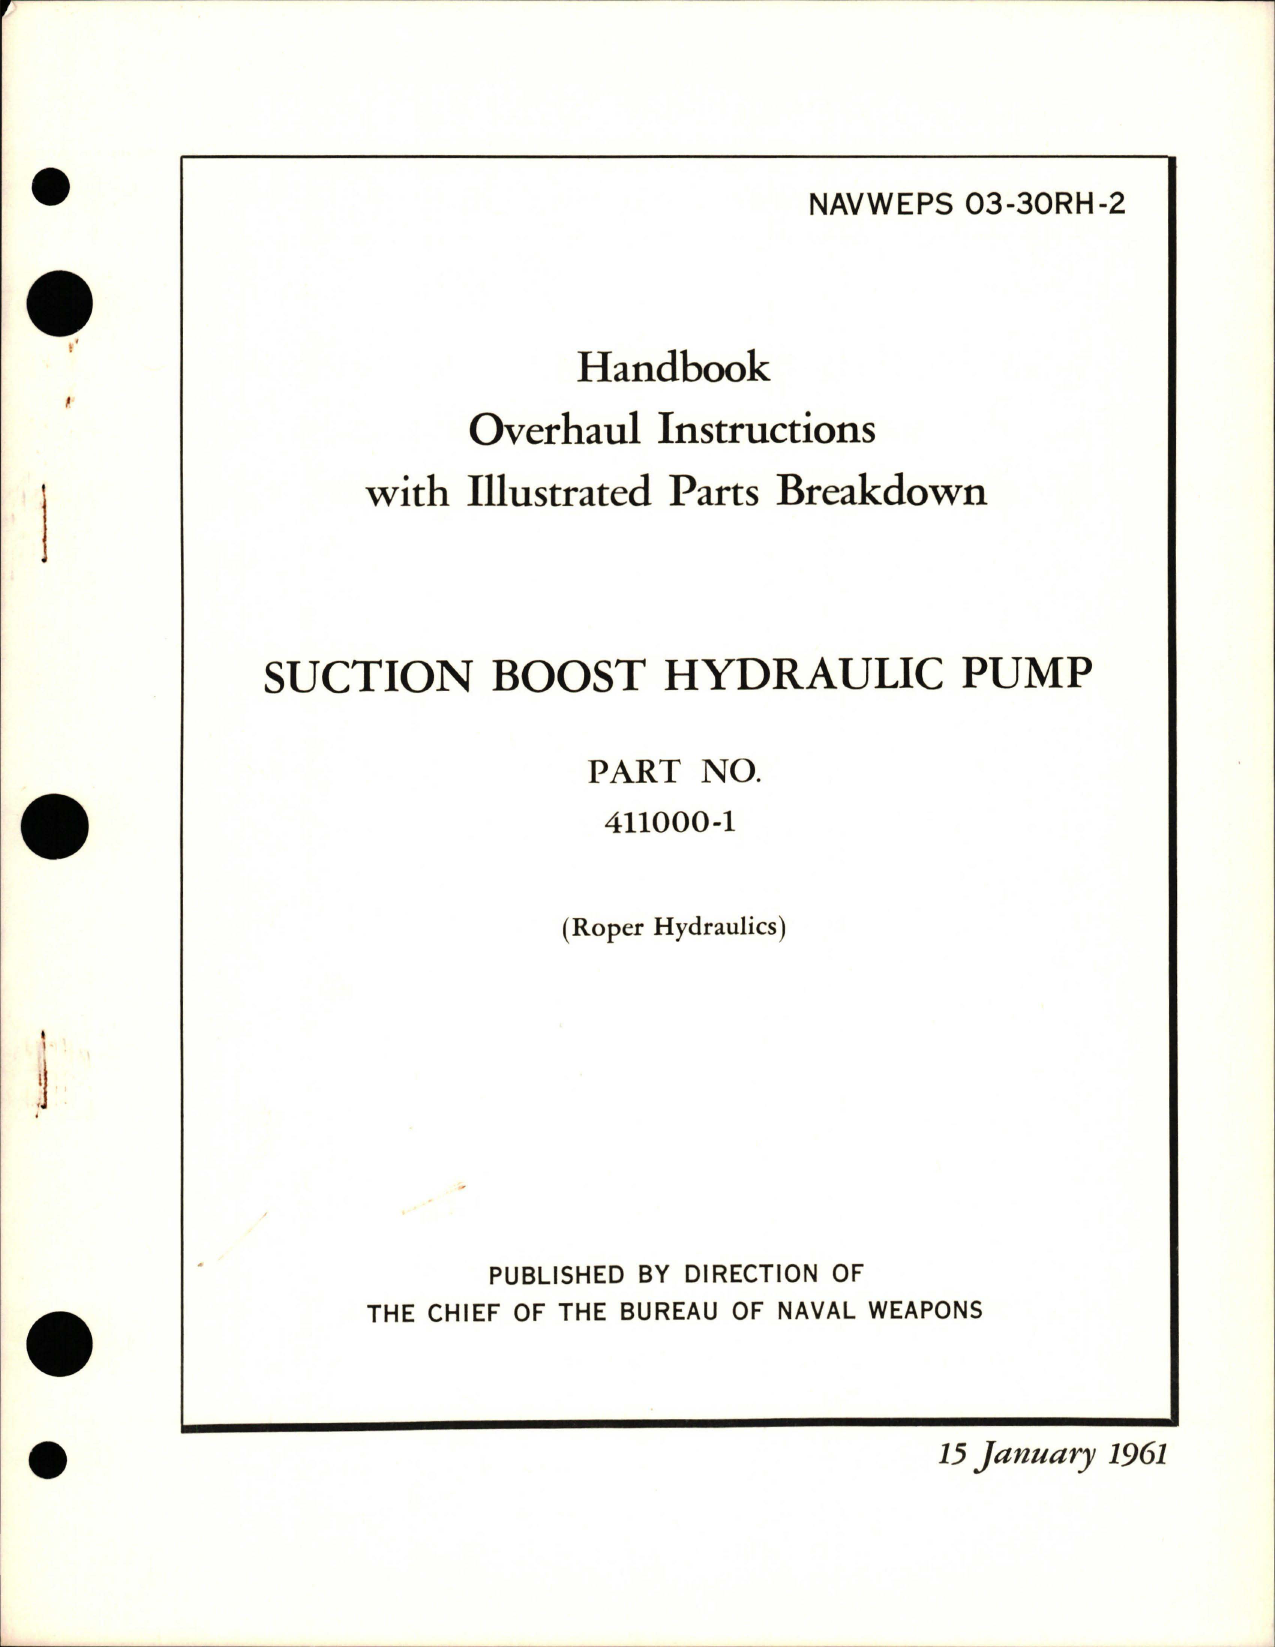 Sample page 1 from AirCorps Library document: Overhaul Instructions with Illustrated Parts Breakdown for Suction Boost Hydraulic Pump - Part 411000-1 